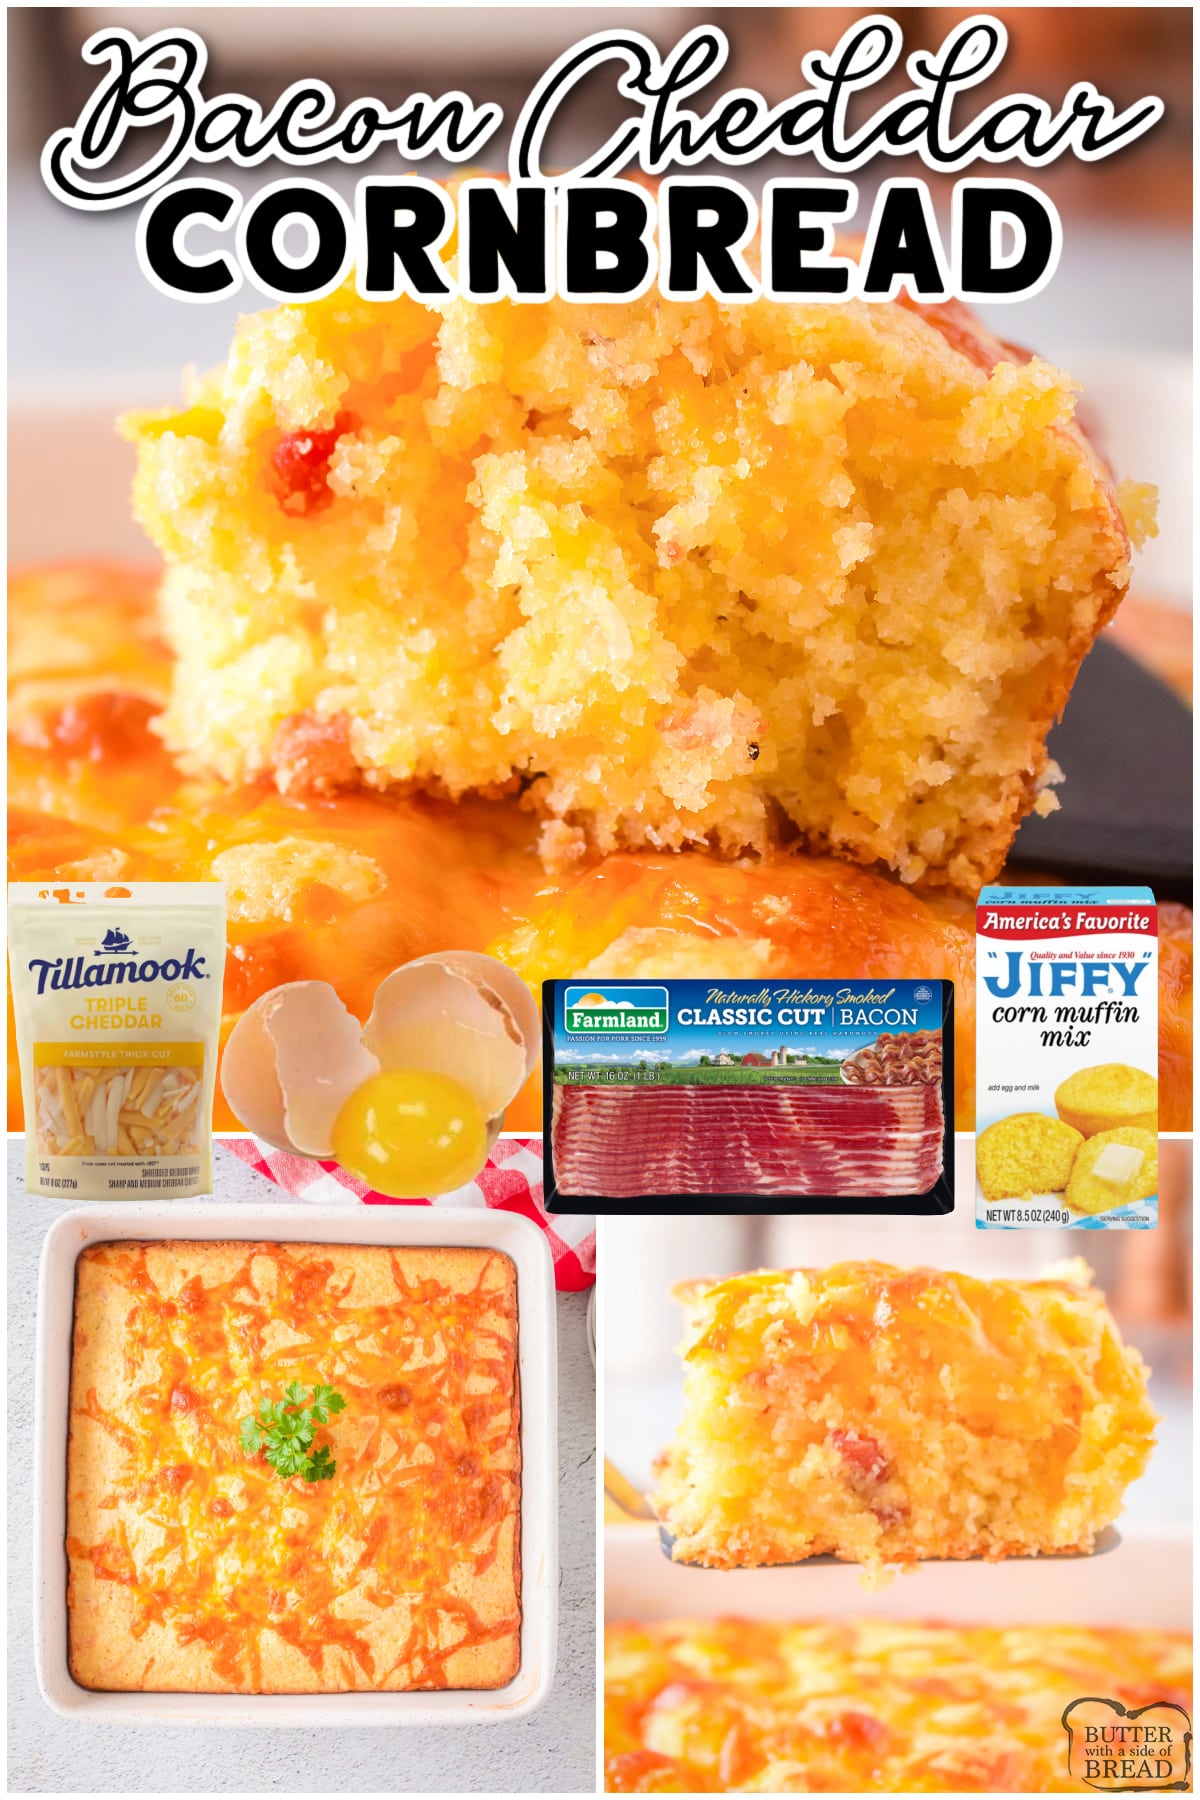 Bacon Cheddar Cornbread is an irresistible savory side dish that starts with a cornbread mix & adds bacon, butter, seasonings & cheddar cheese! Amazing bacon cornbread to serve alongside dinner.